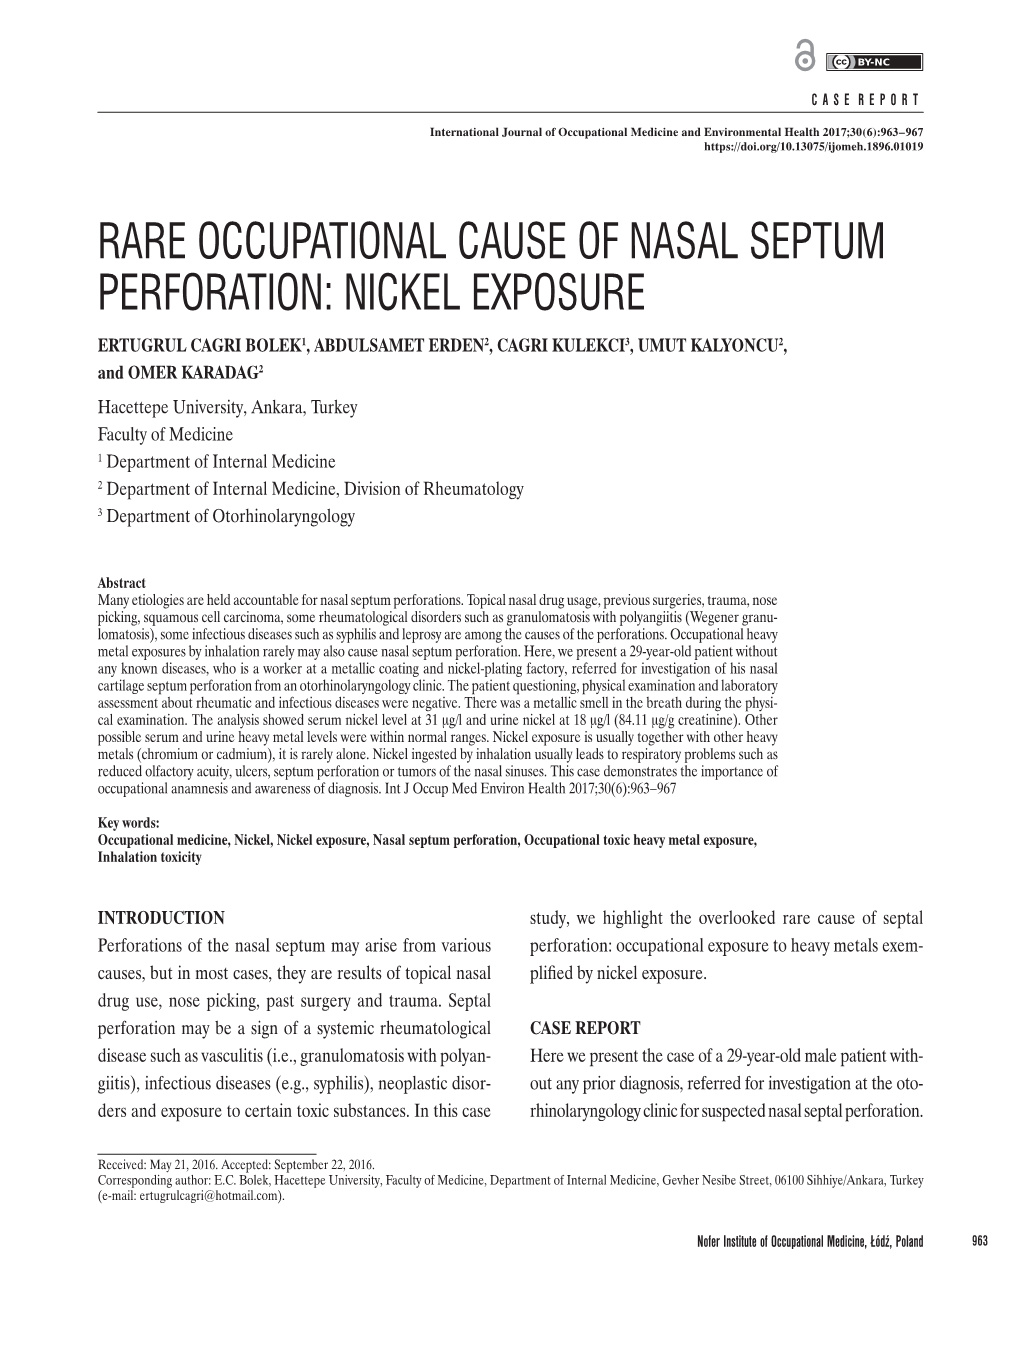 Rare Occupational Cause of Nasal Septum Perforation